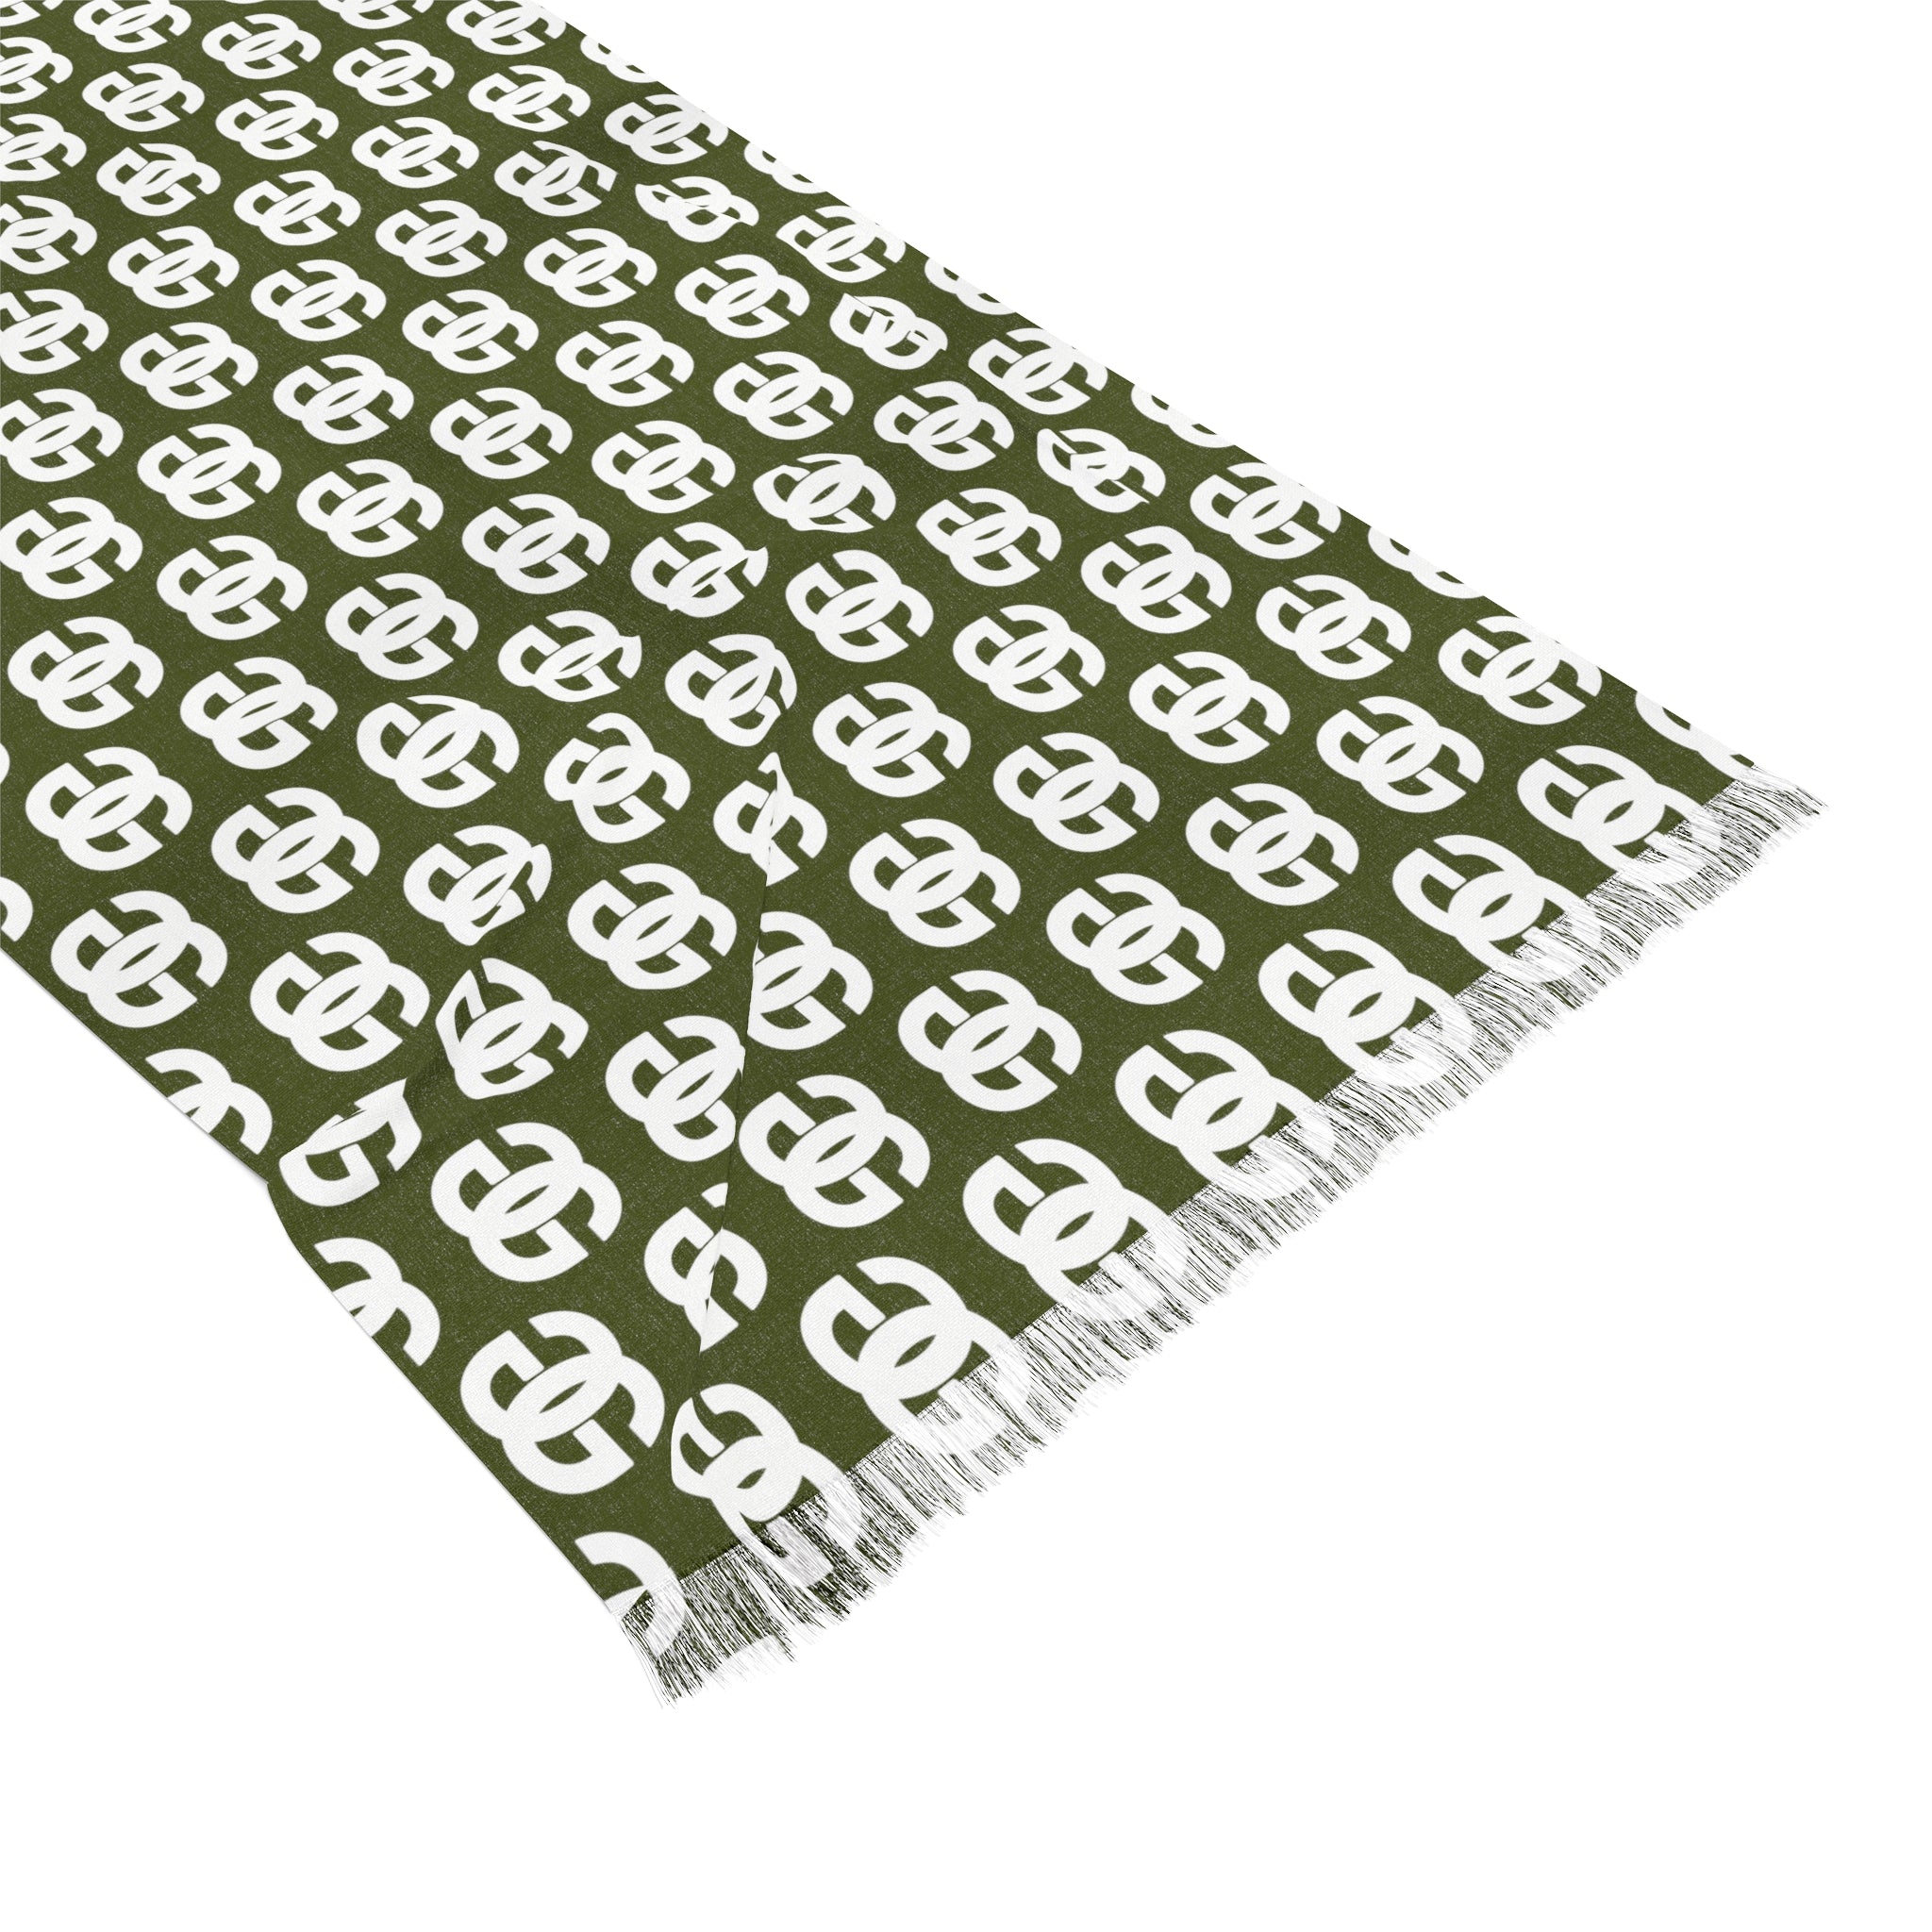 G is for Groove Logo (Army Green) Light Scarf Scarves  The Middle Aged Groove